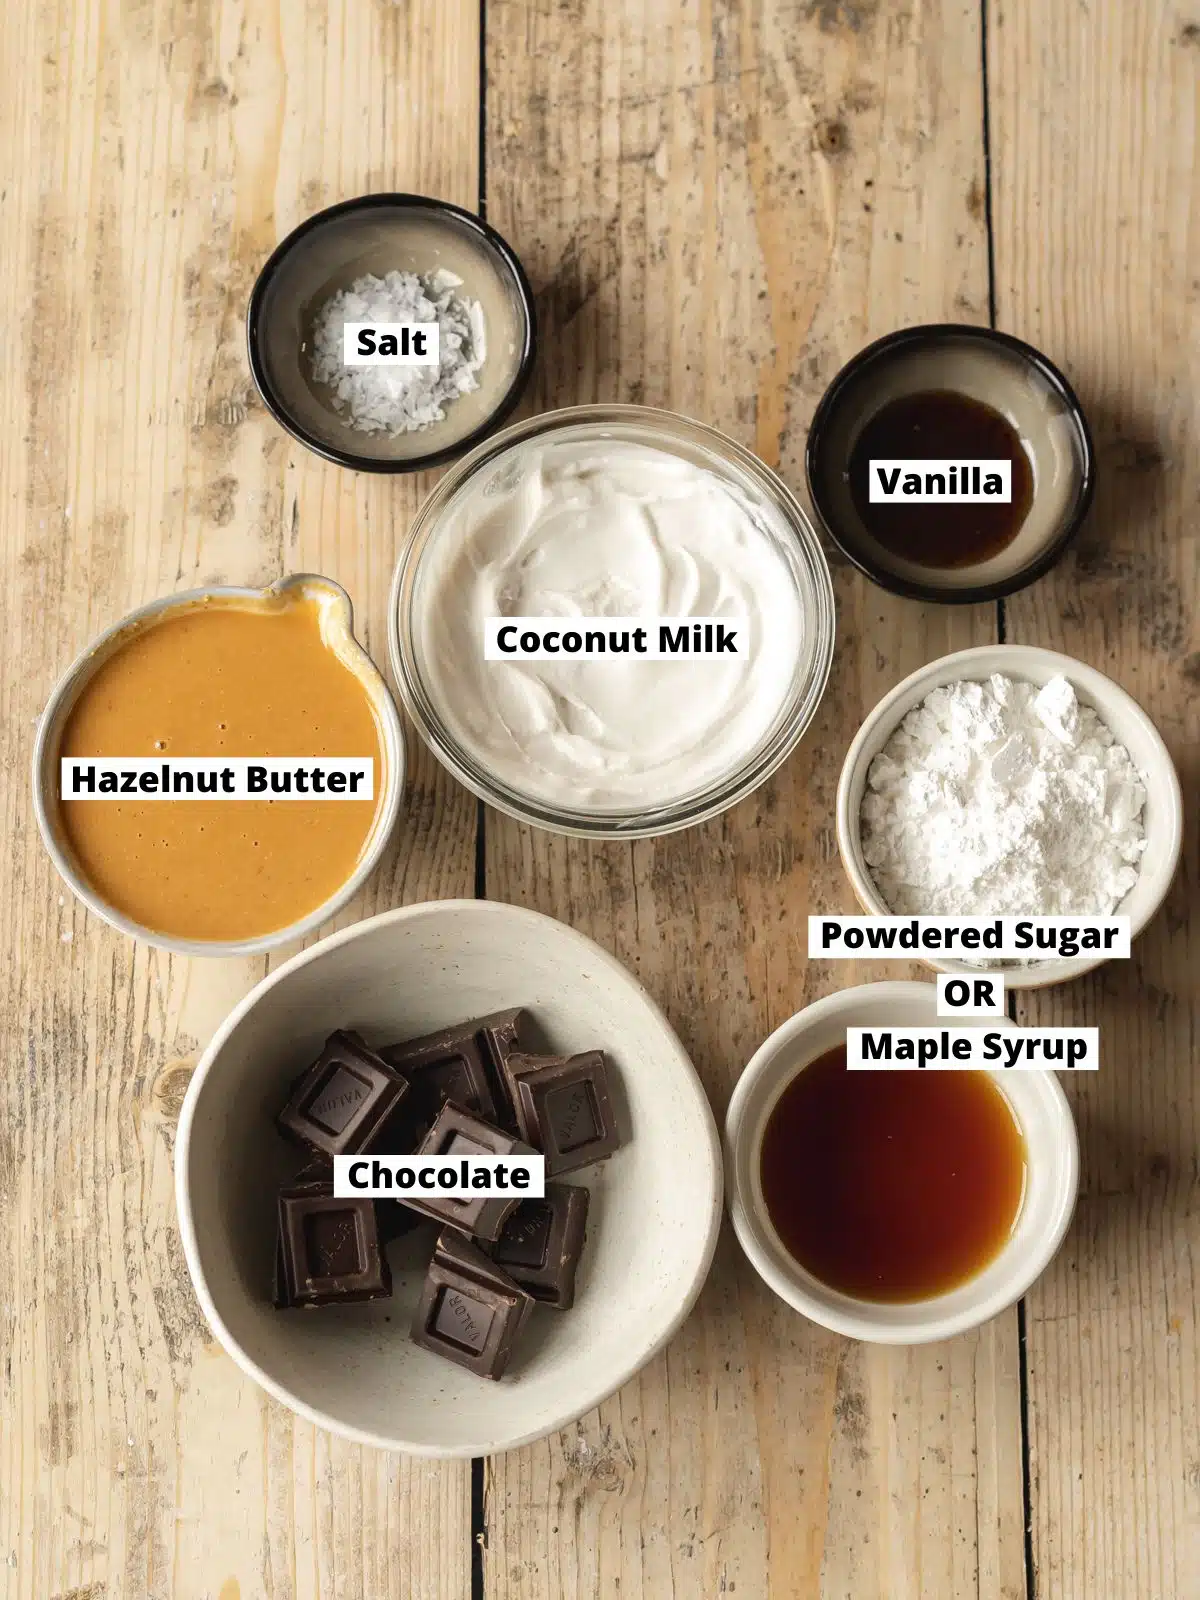 Ingredients needed to make vegan Nutella chocolate hazelnut spread measured out into bowls on a wooden table.